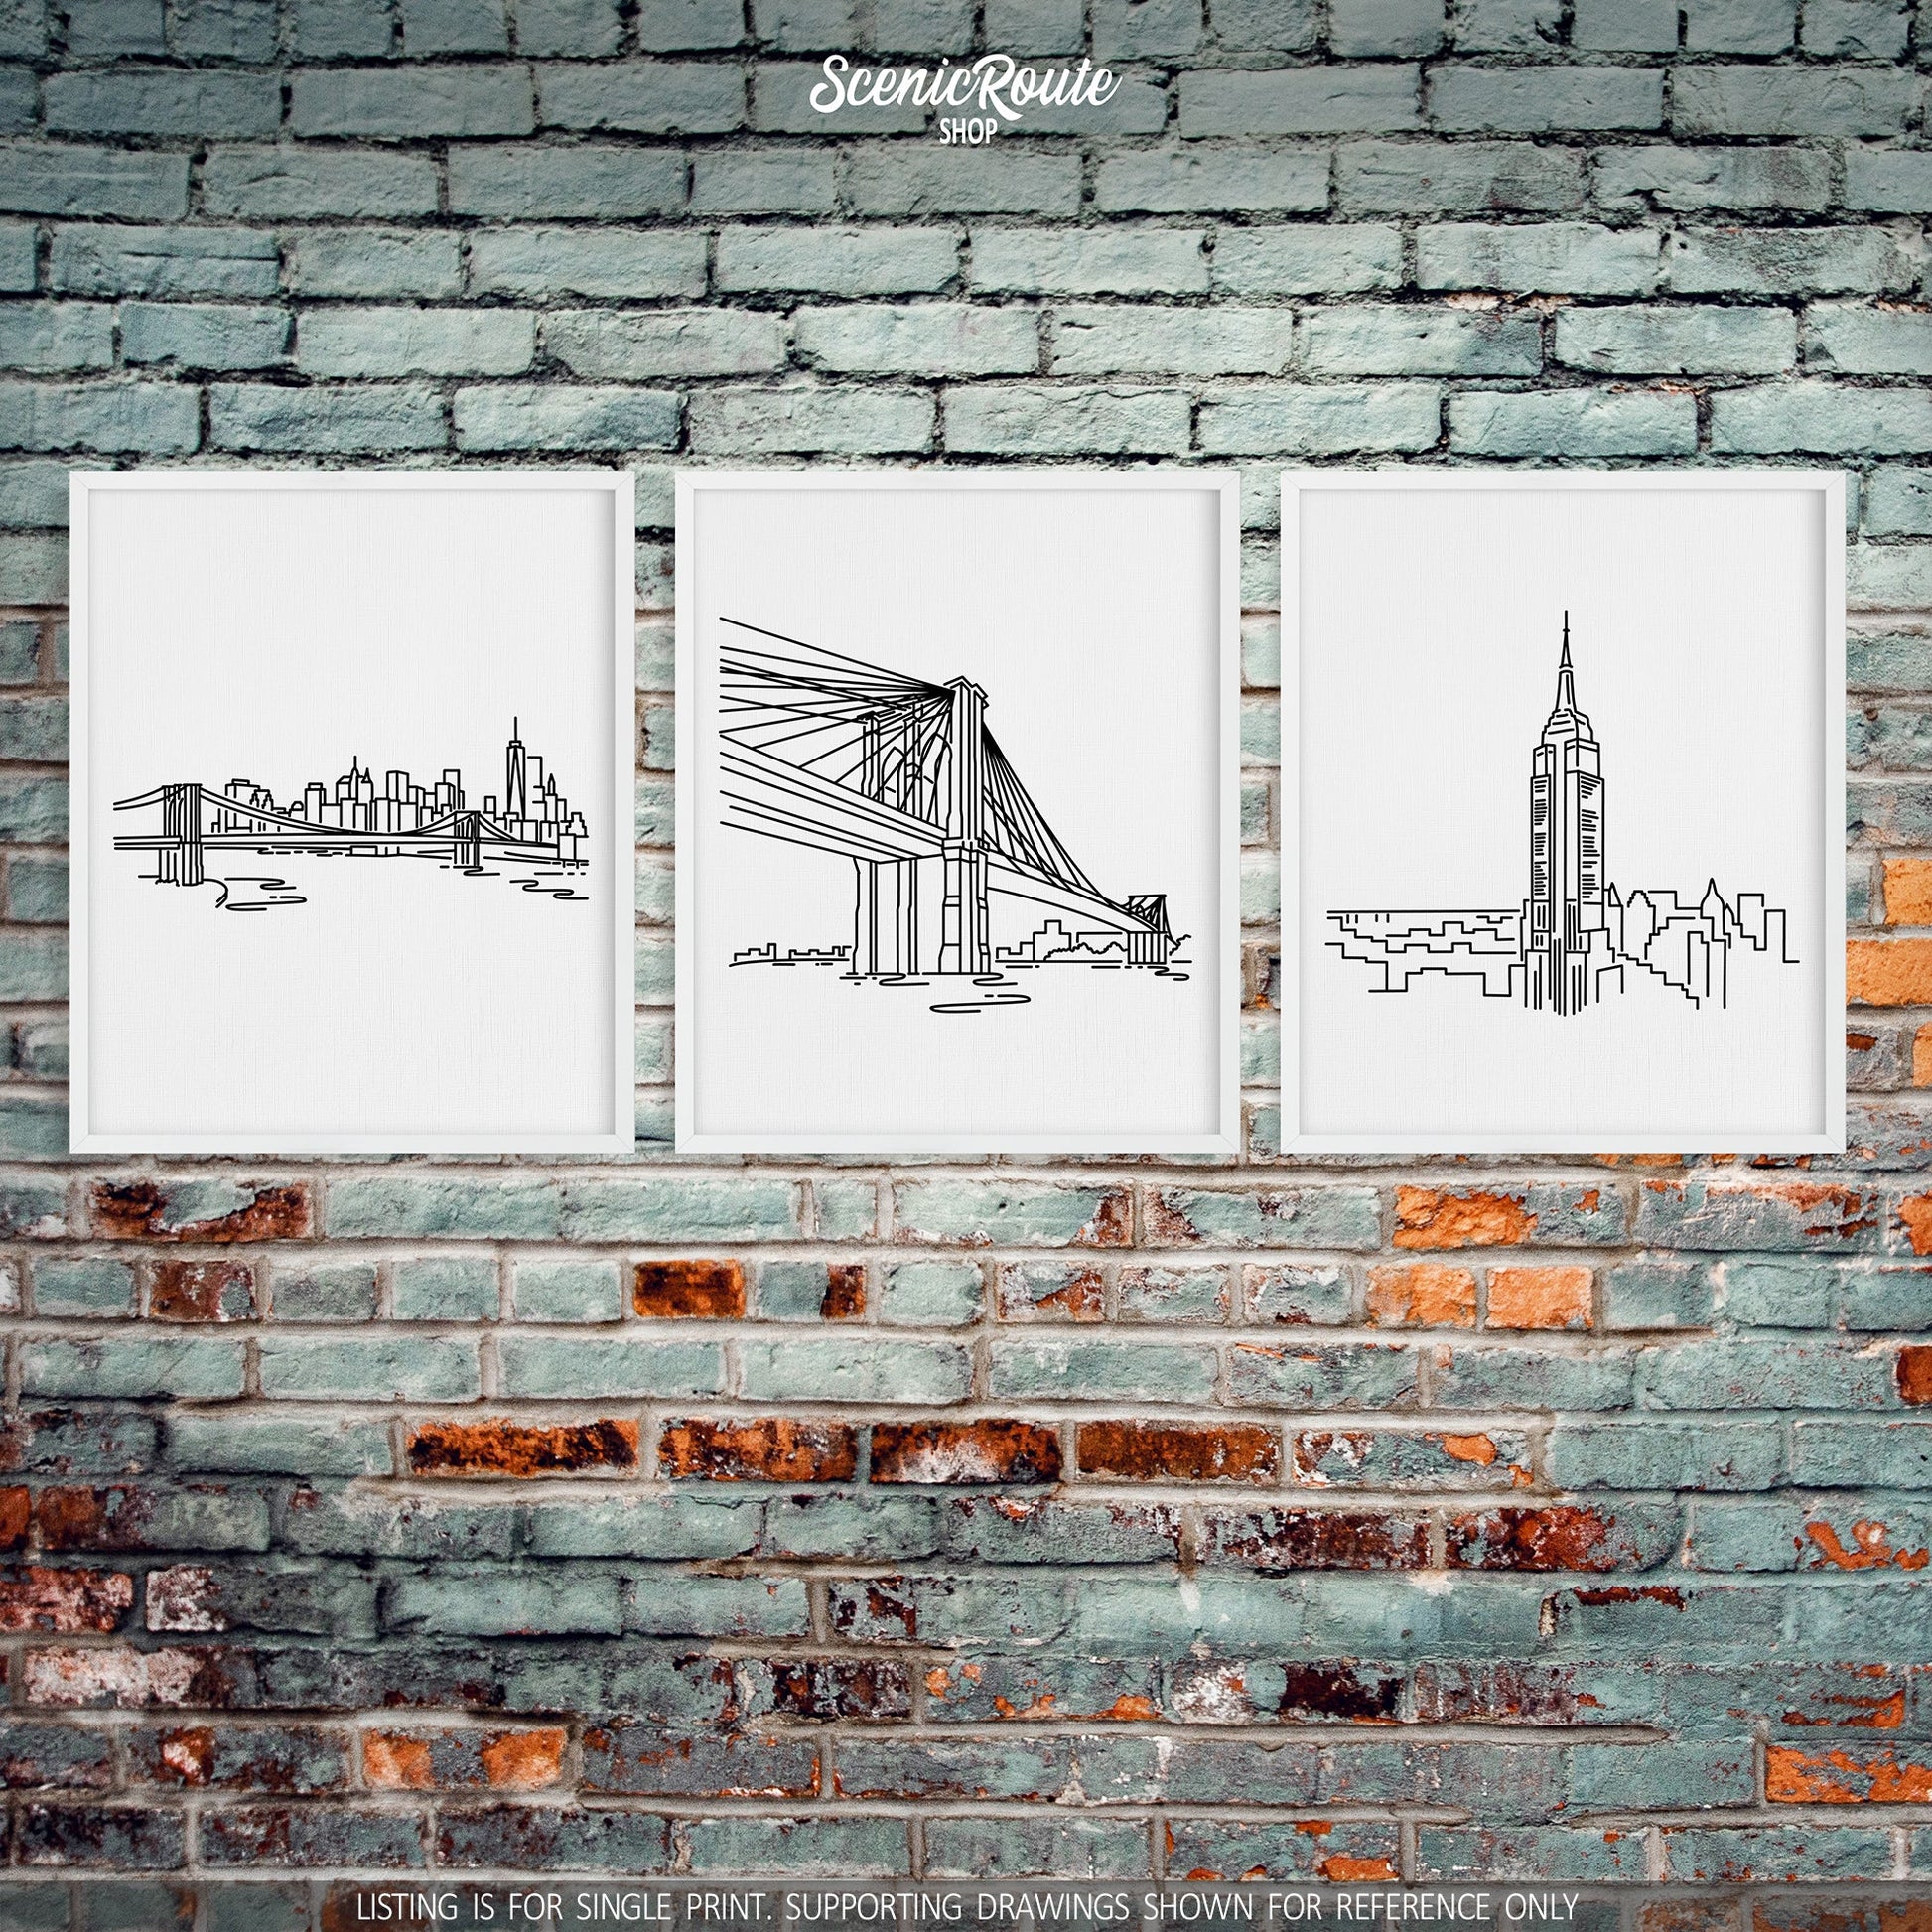 A group of three framed drawings on a brick wall. The line art drawings include the New York Skyline, Brooklyn Bridge, and Empire State Building